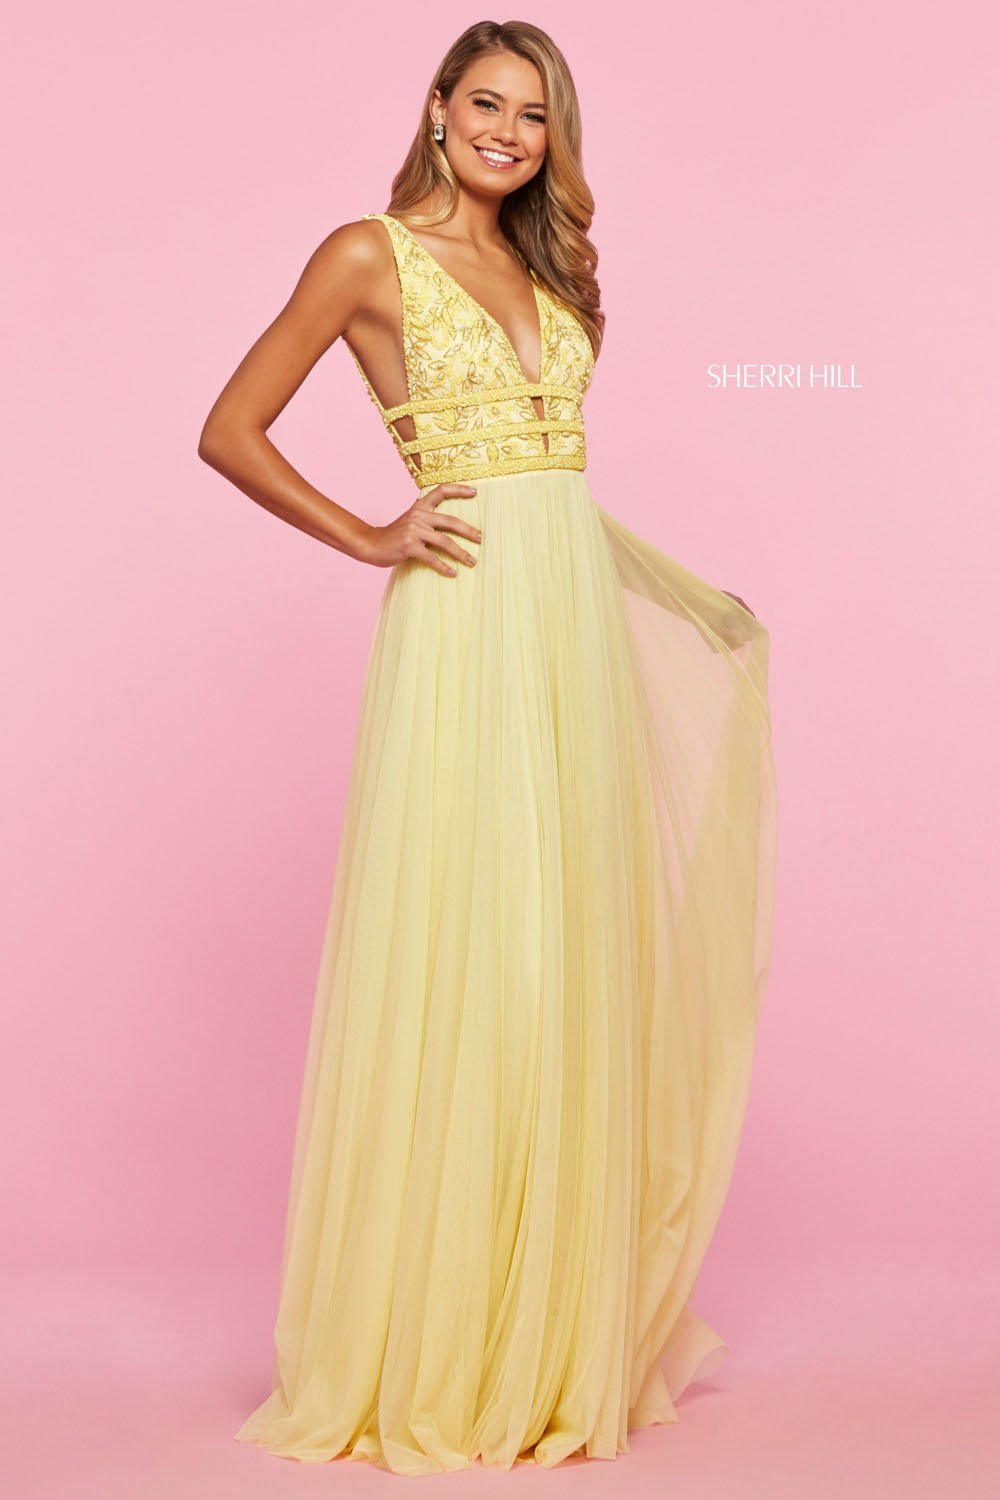 Sherri Hill 53551 dress images in these colors: Light Pink, Light Blue, Yellow, Nude Ivory.